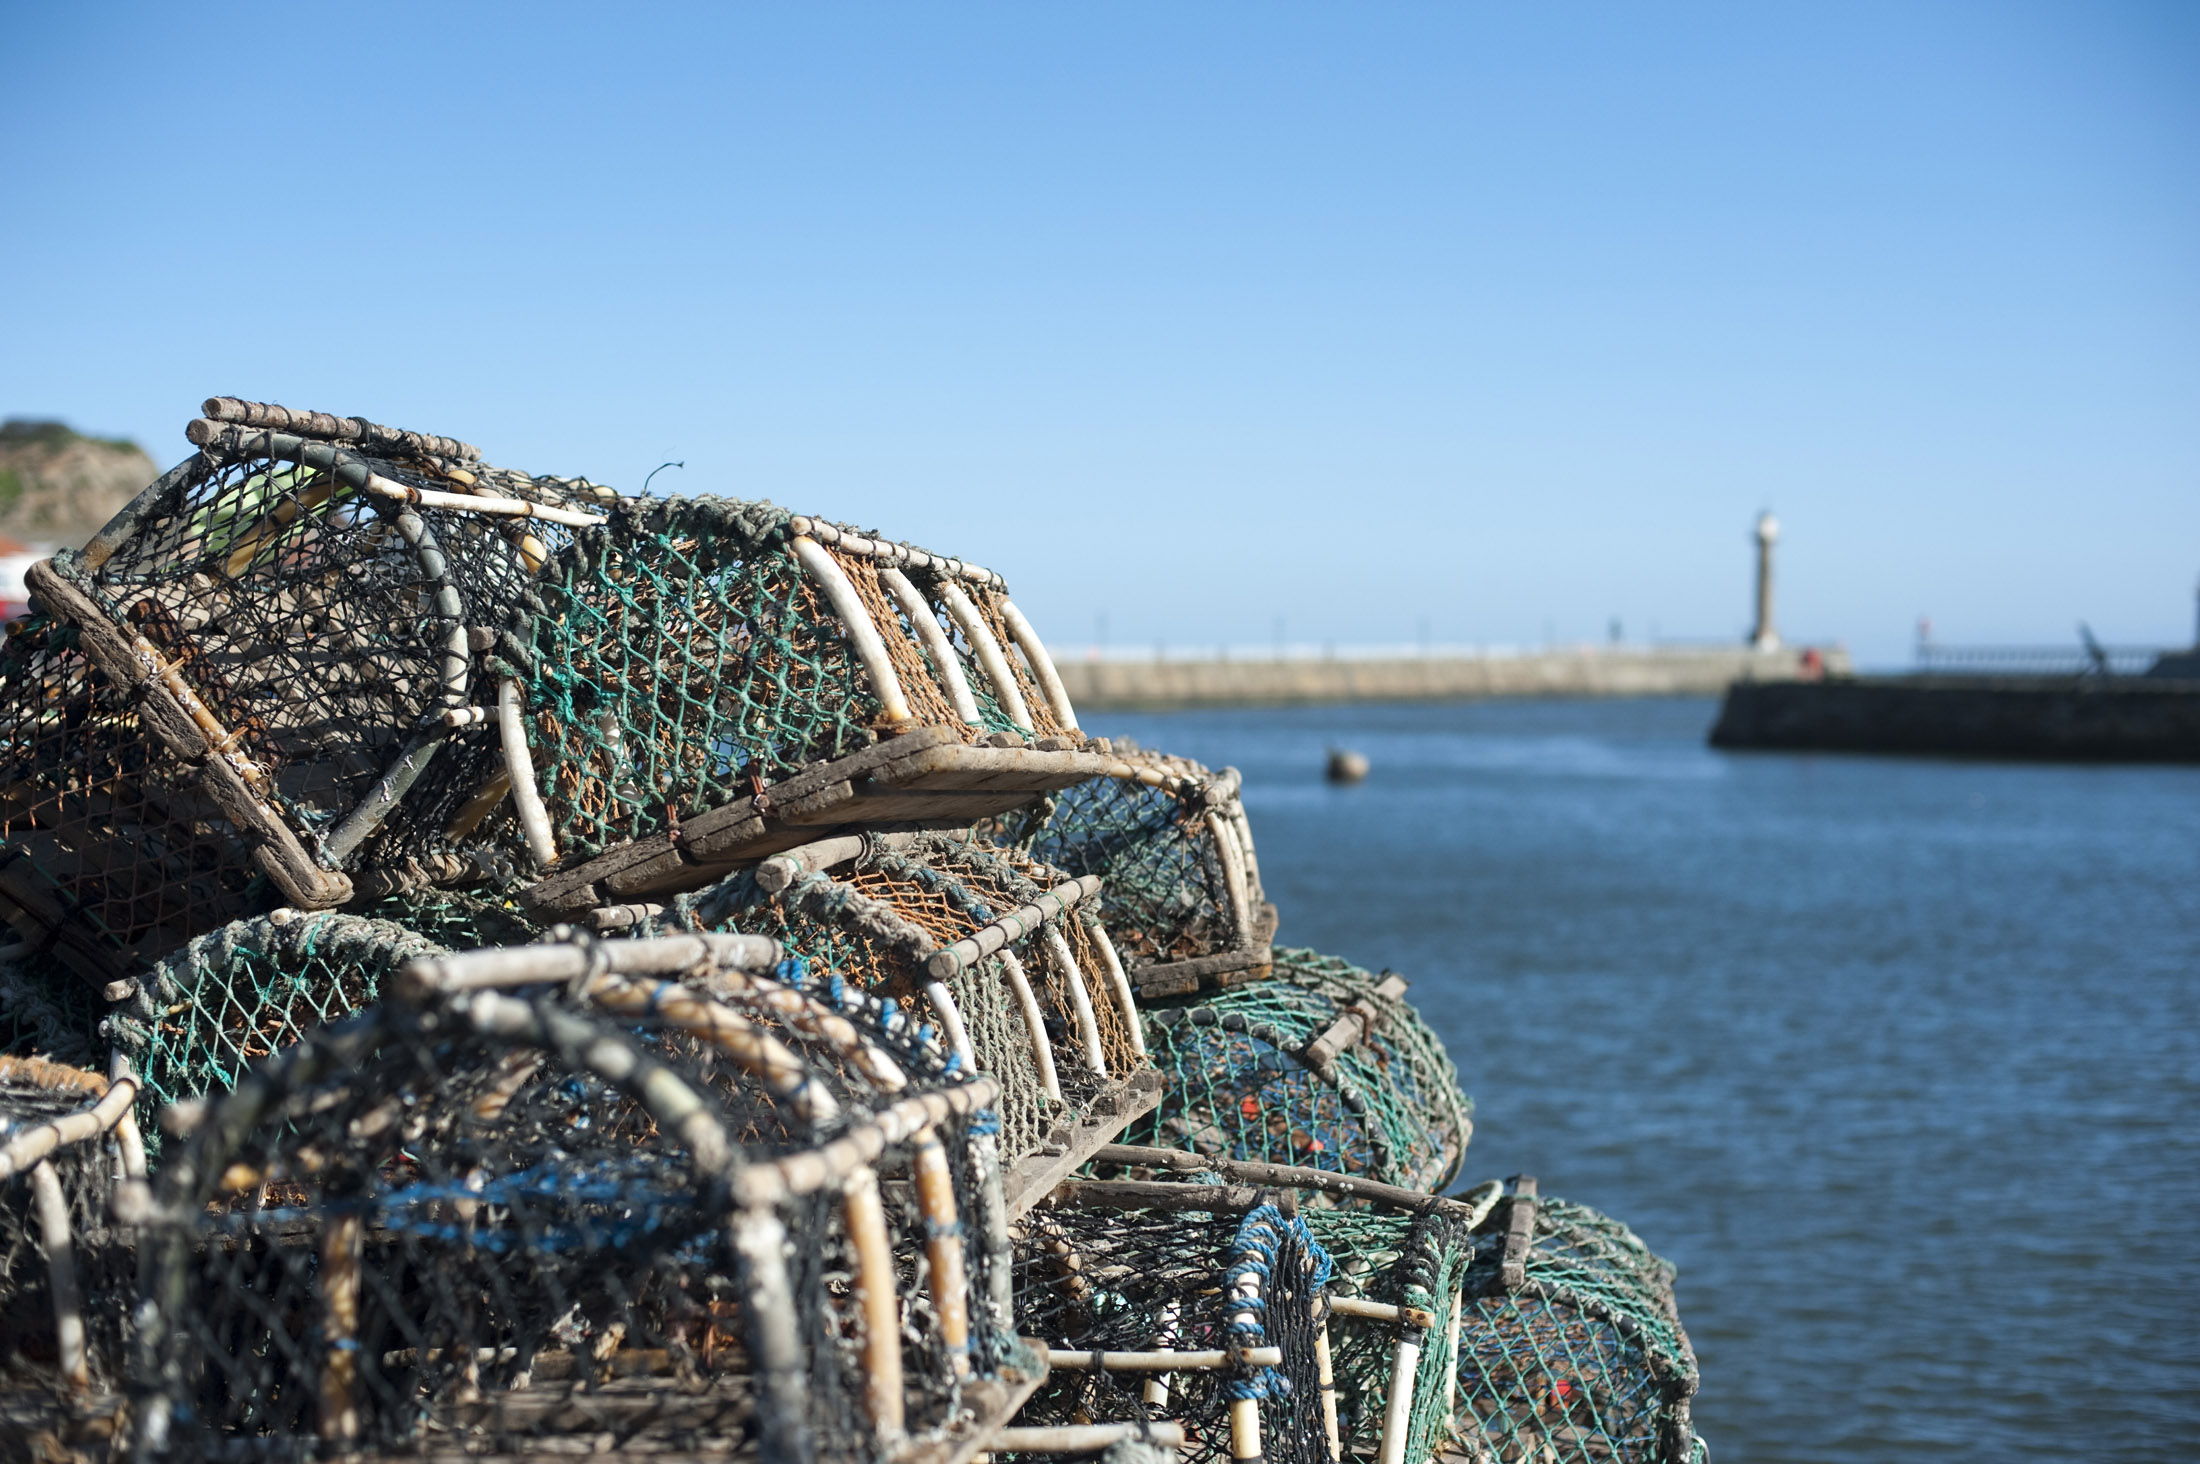 Free Stock photo of lobster pots | Photoeverywhere